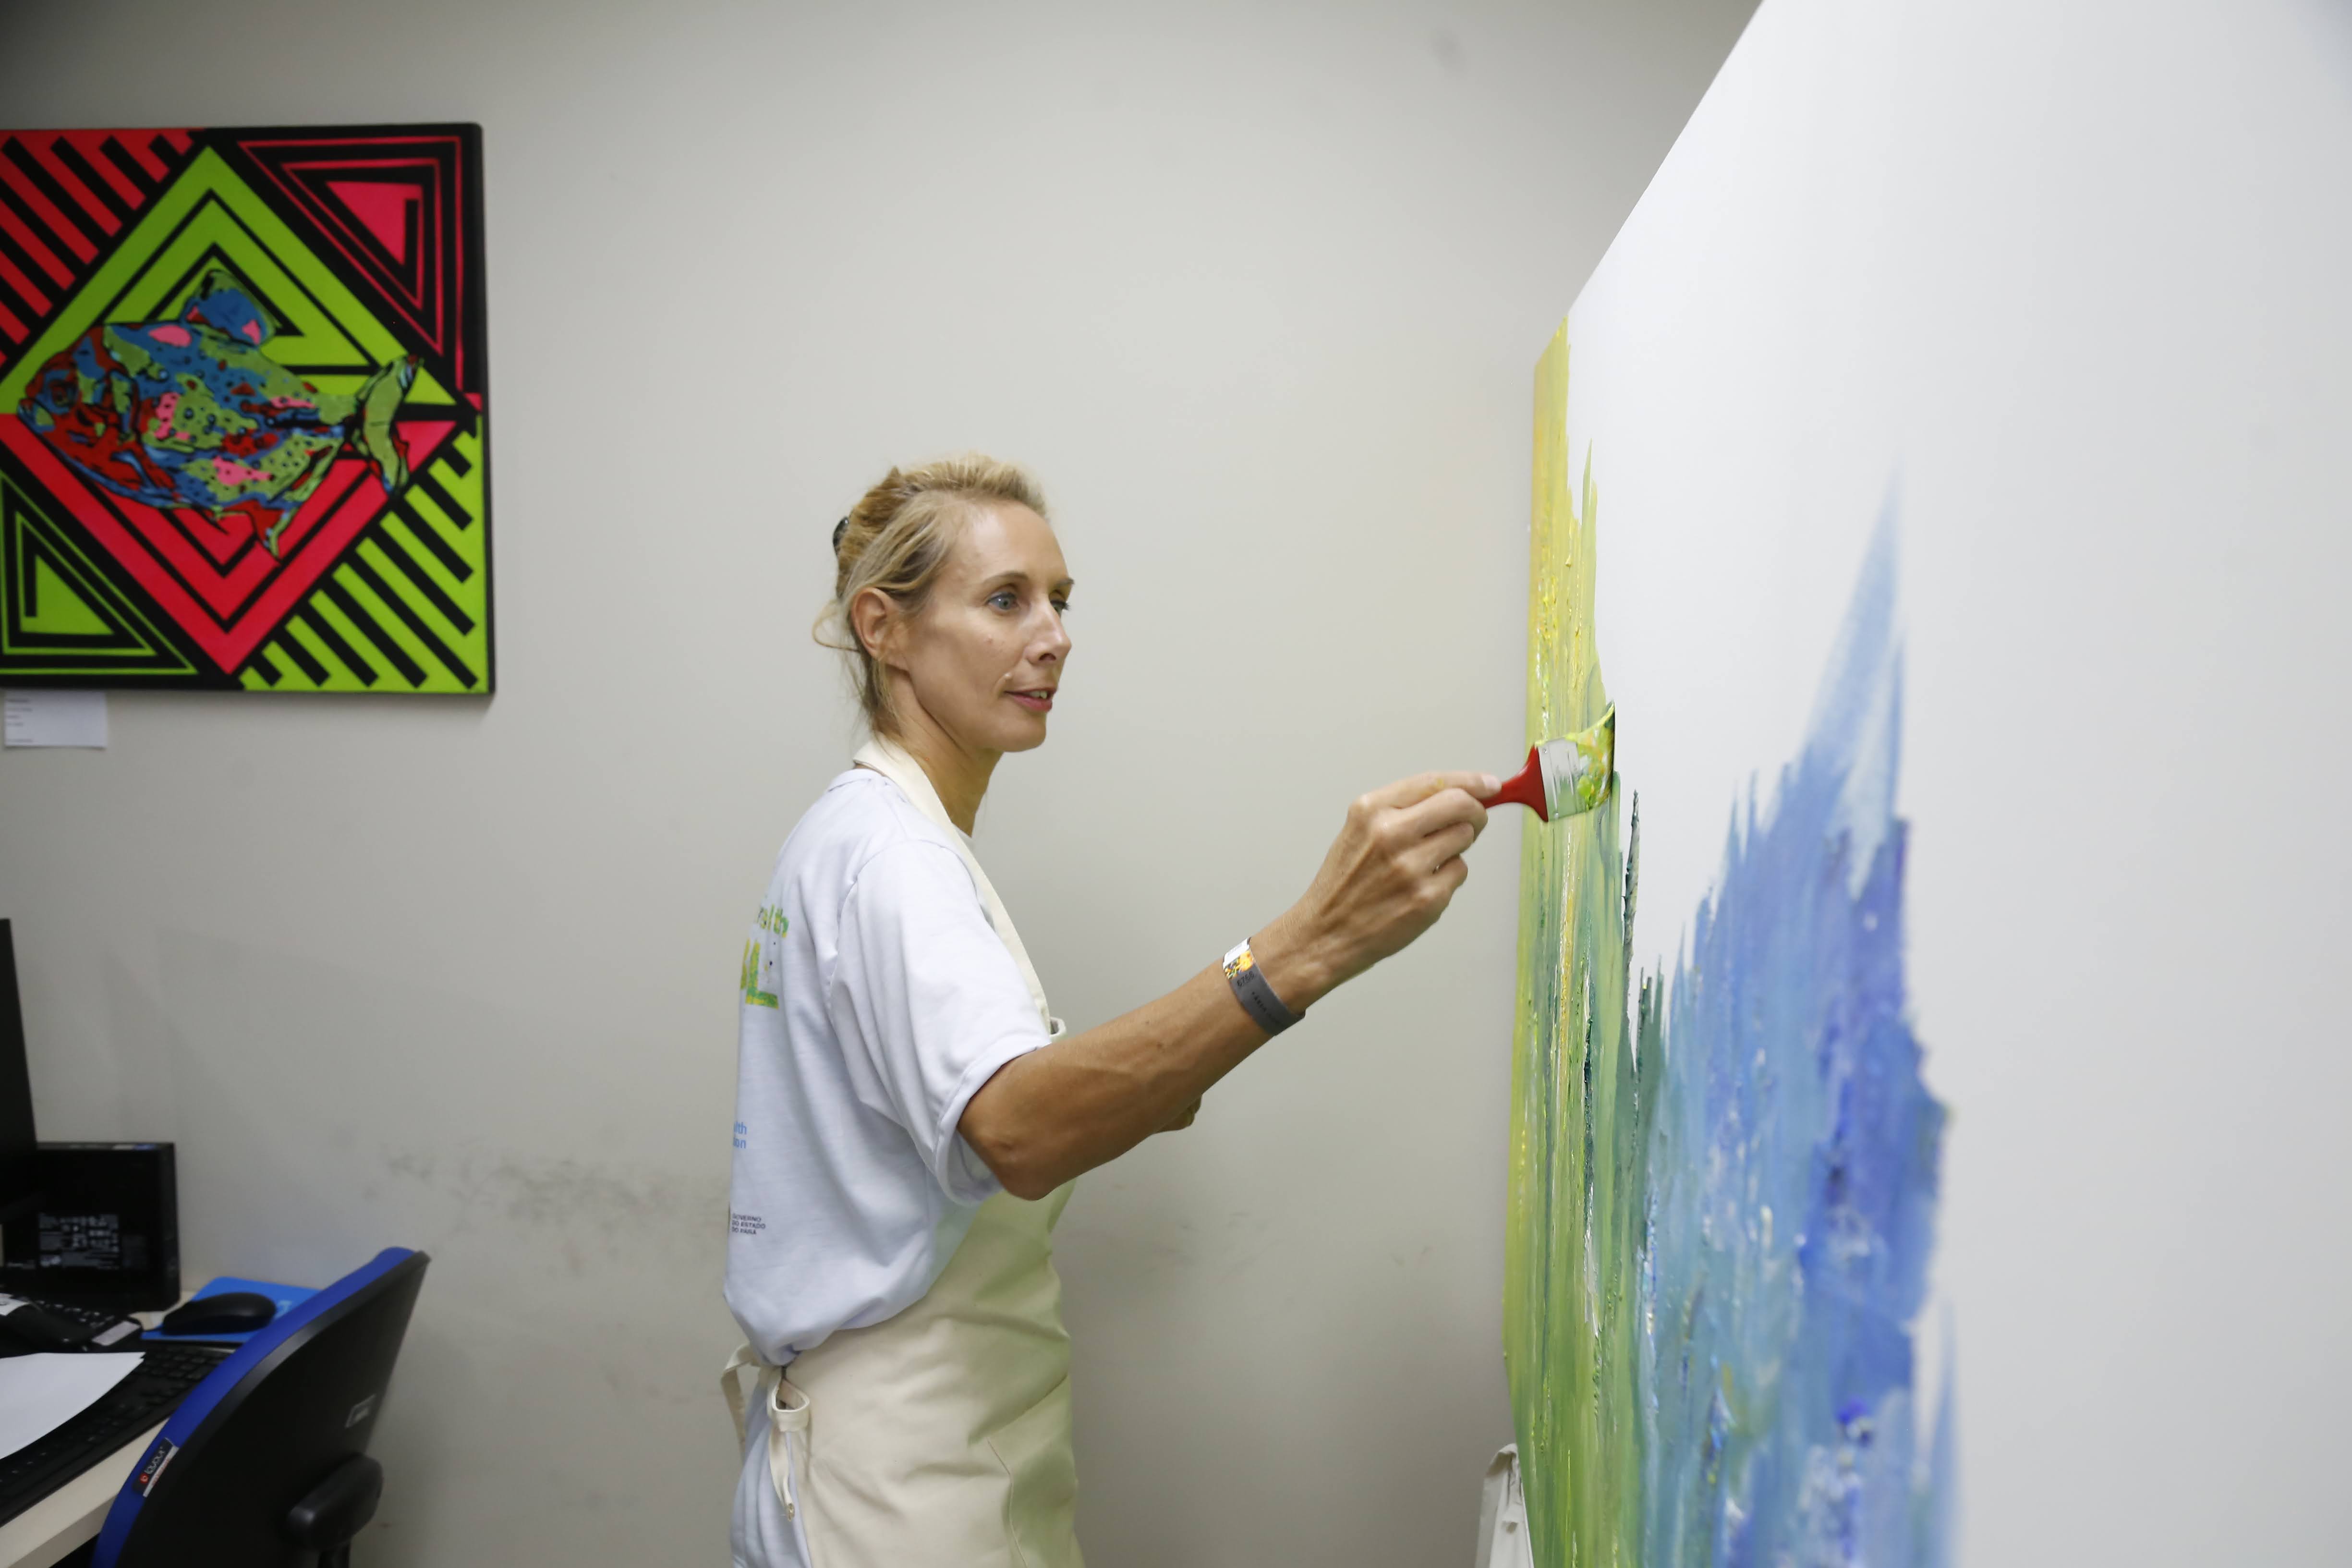 Artist Isabelle Wachsmuth paints a mural